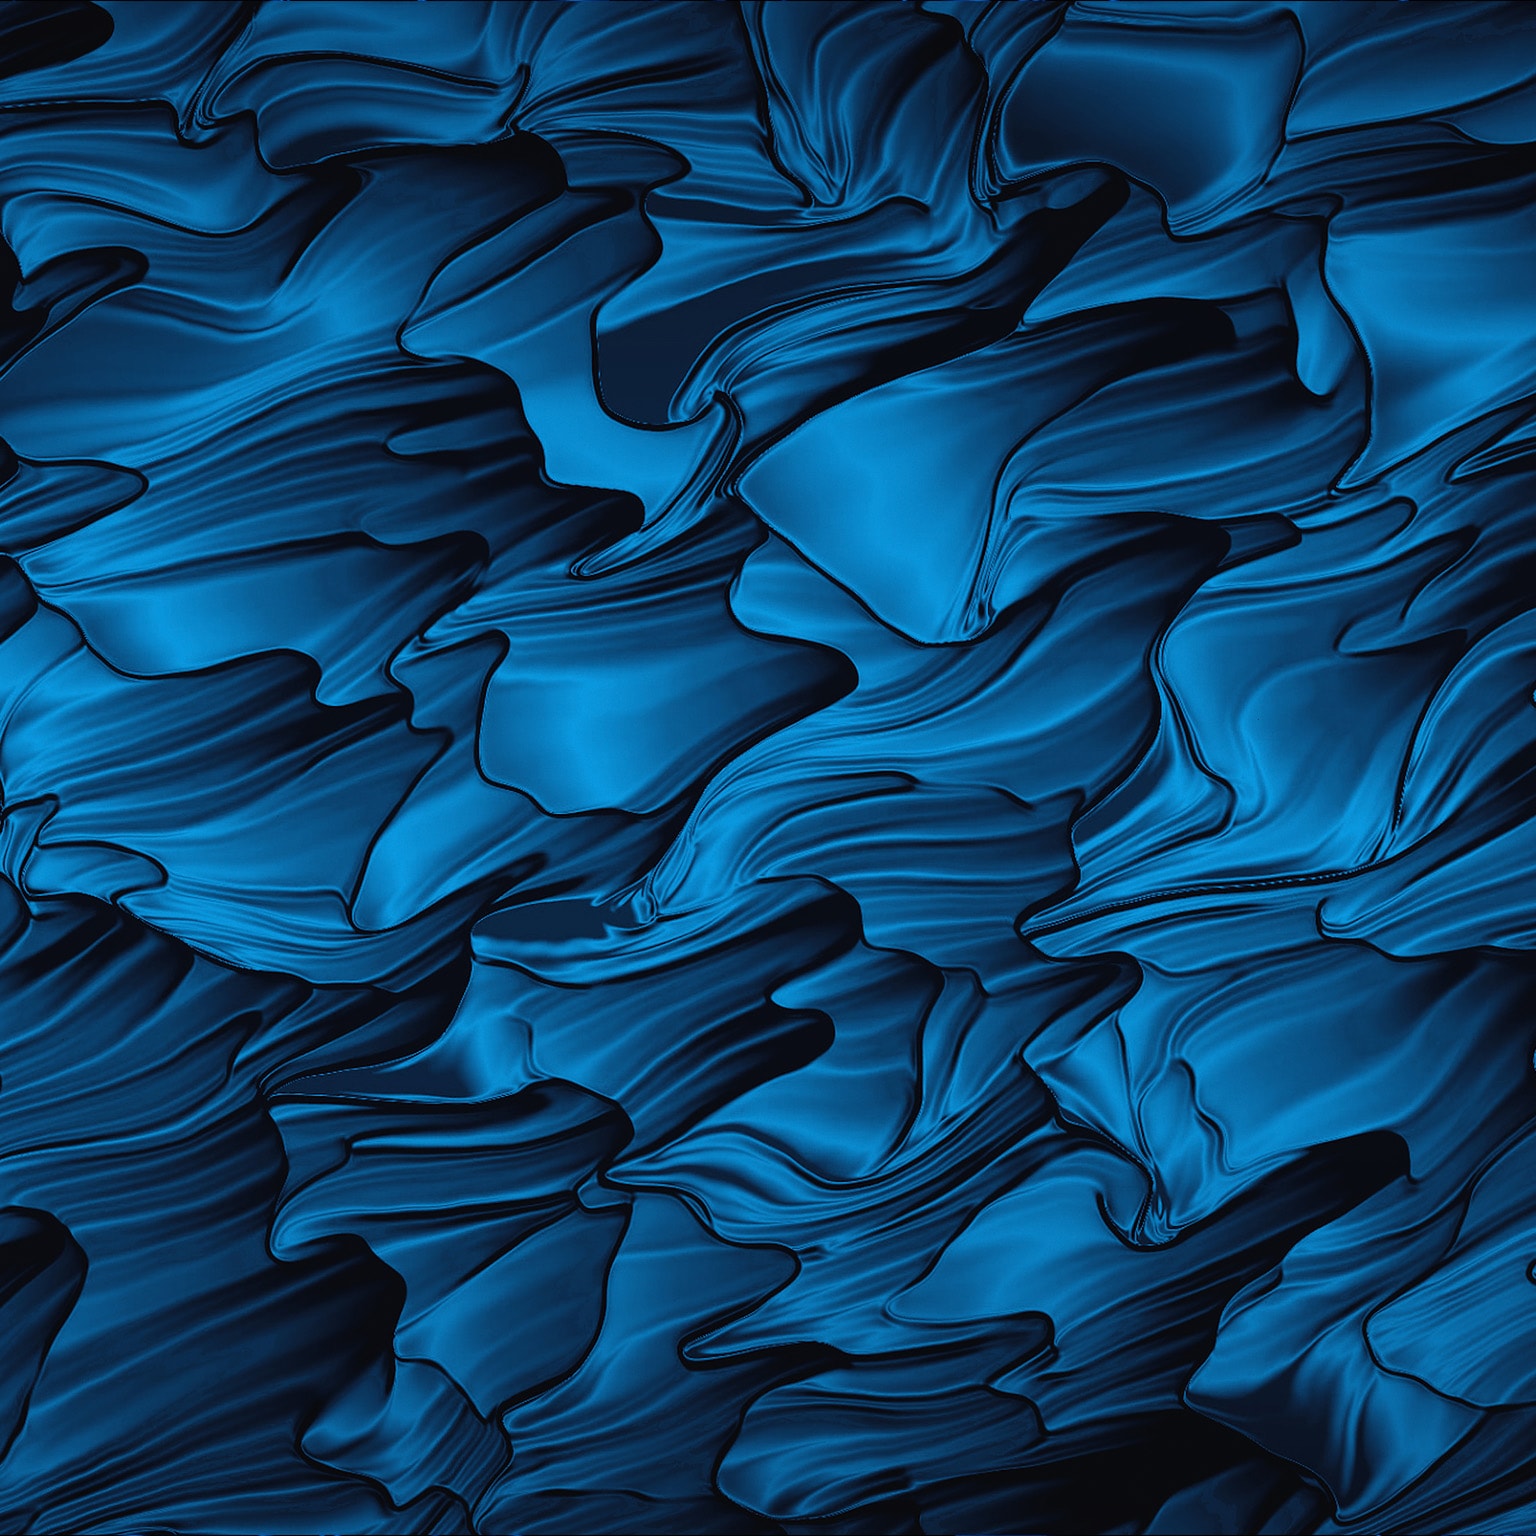 Moving illustration of wavy blue lines that was produced using computer code